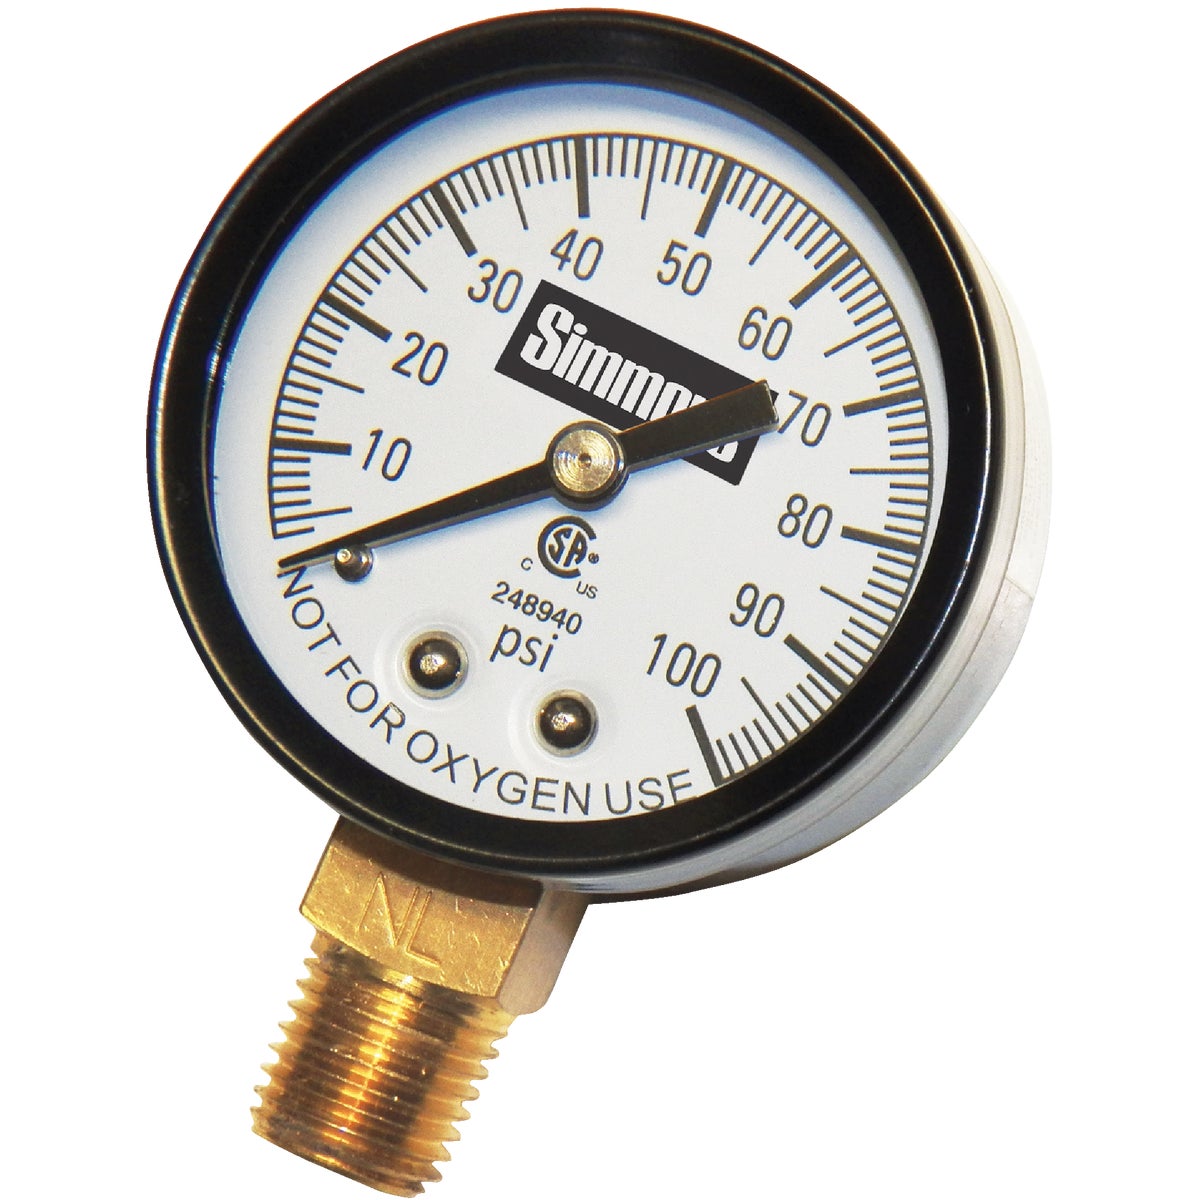 Item 462810, Pressure gauges are suitable for air, steam, and other pressure 